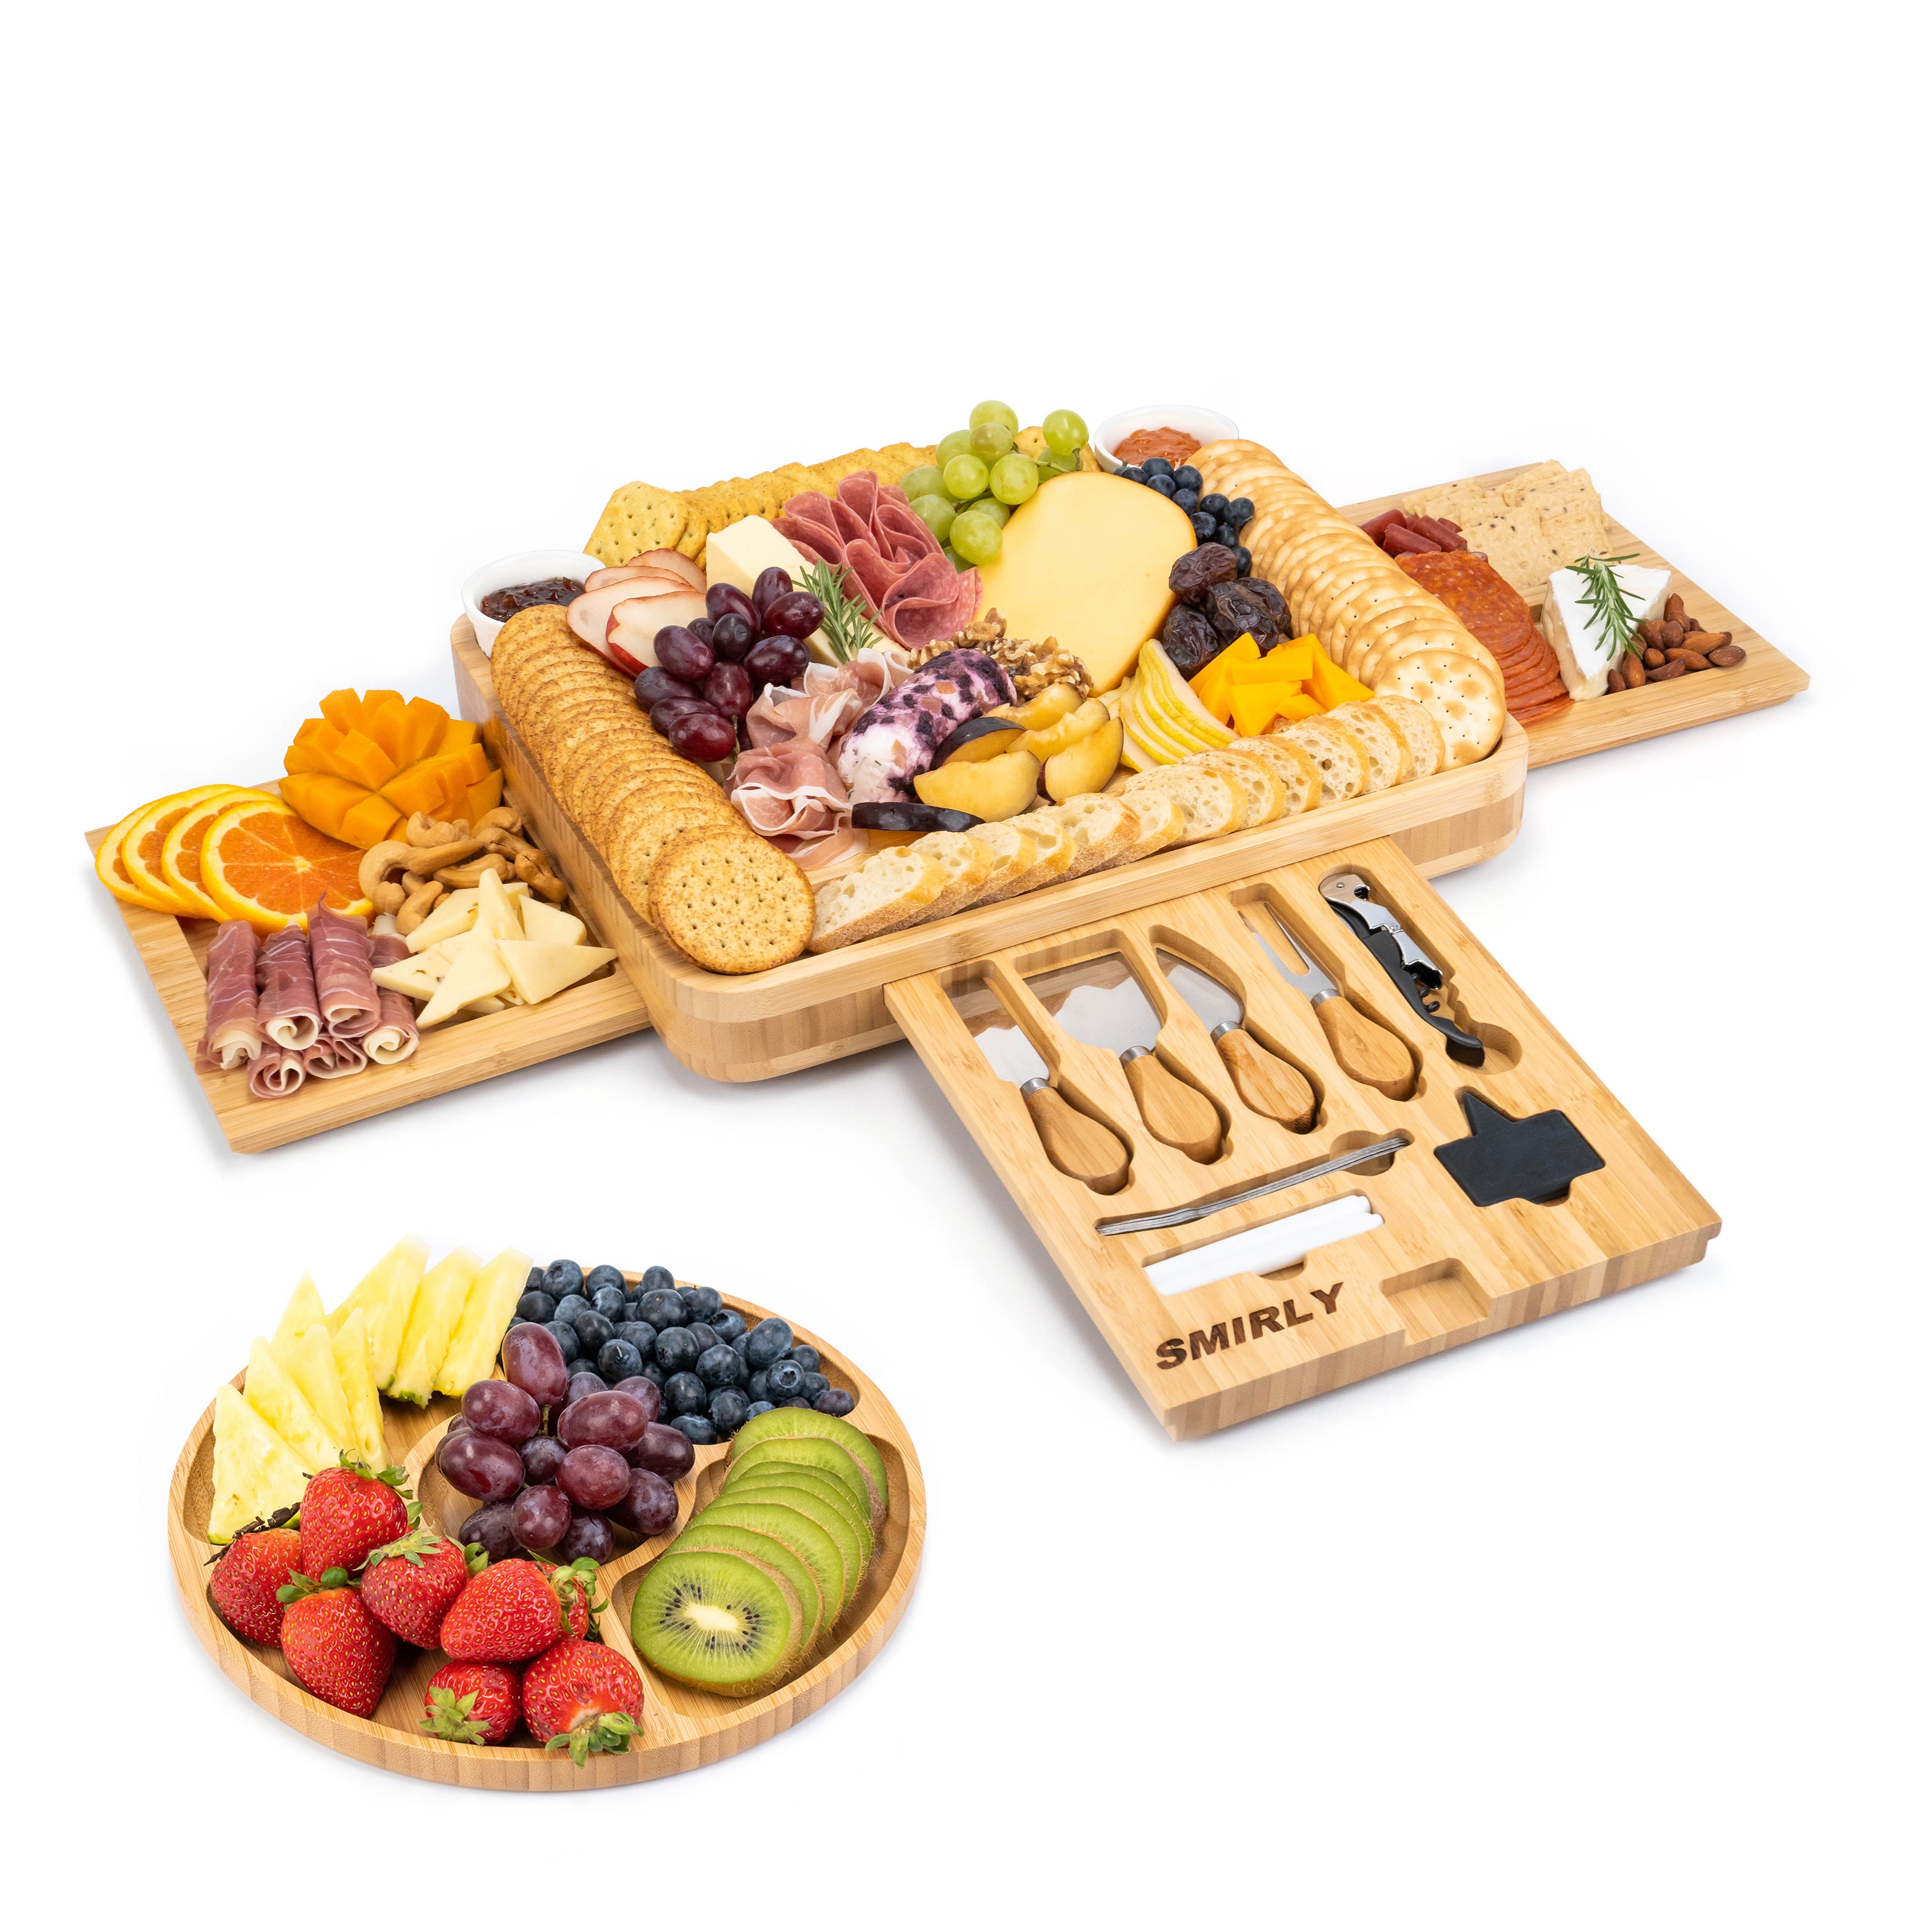 50% Coupon: SMIRLY Wood Cutting Boards for Kitchen